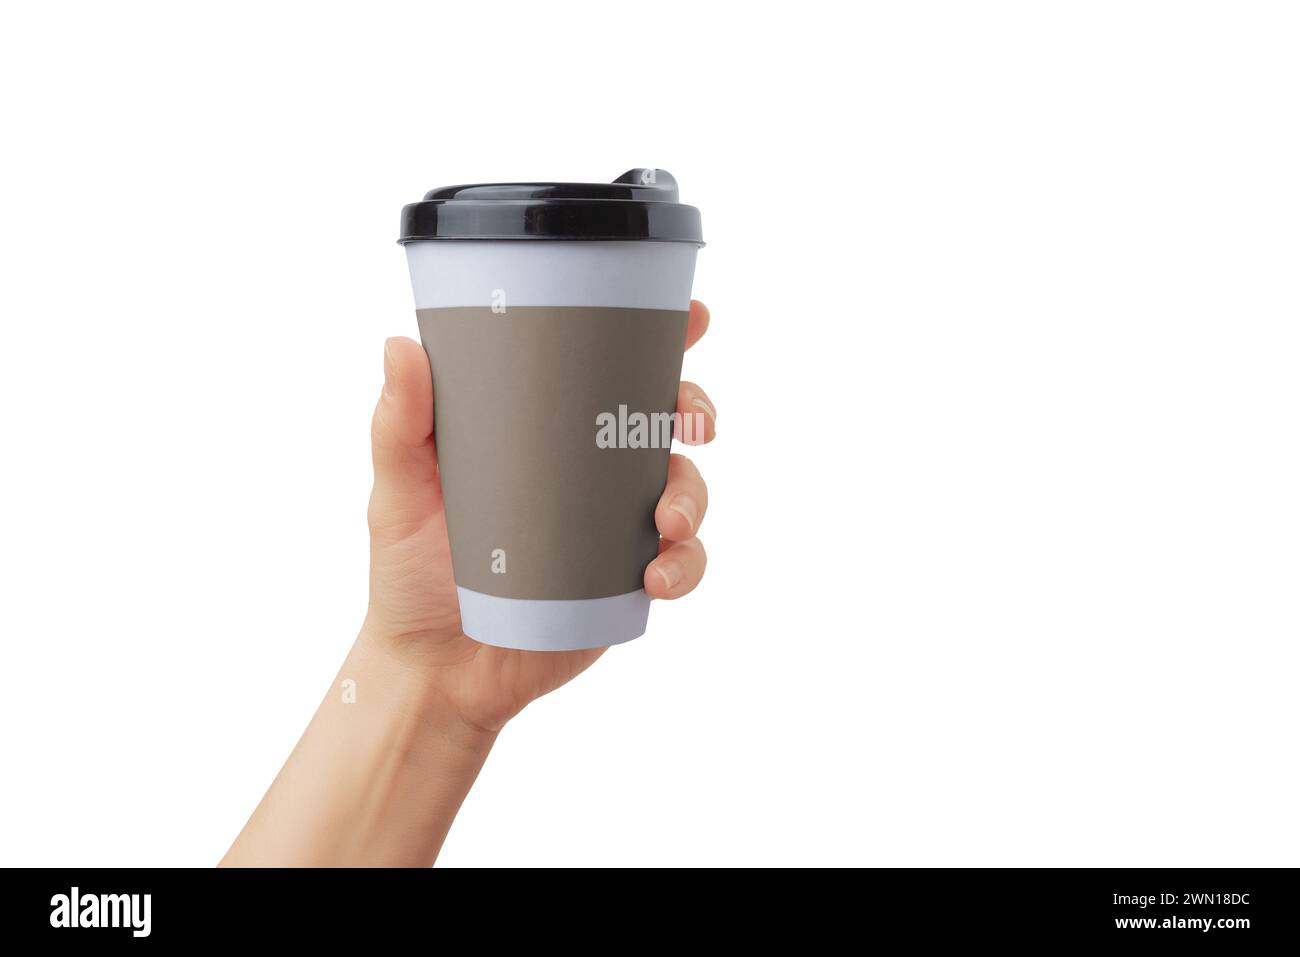 Paper cup with slave in hand isolated in white background. Clean surface for logo promotion, branding Stock Photo